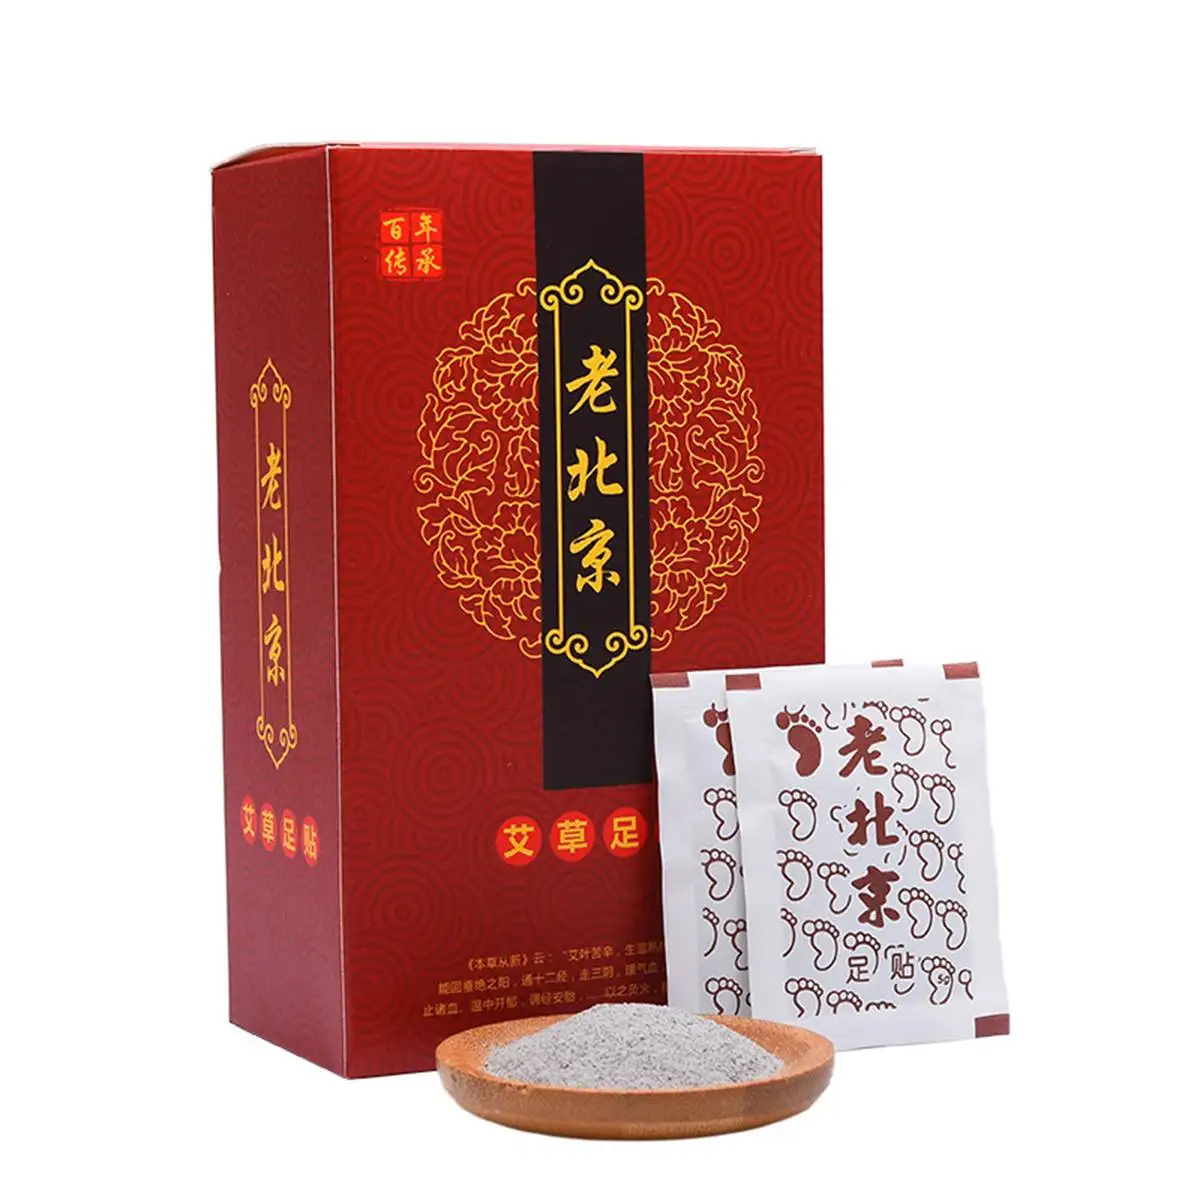 

100 Pcs Detox Loss Weight Foot Patch Improve Sleep Old Beijing Ginger Wormwood Foot Patch Anti-Swelling Revitalizing Health Care